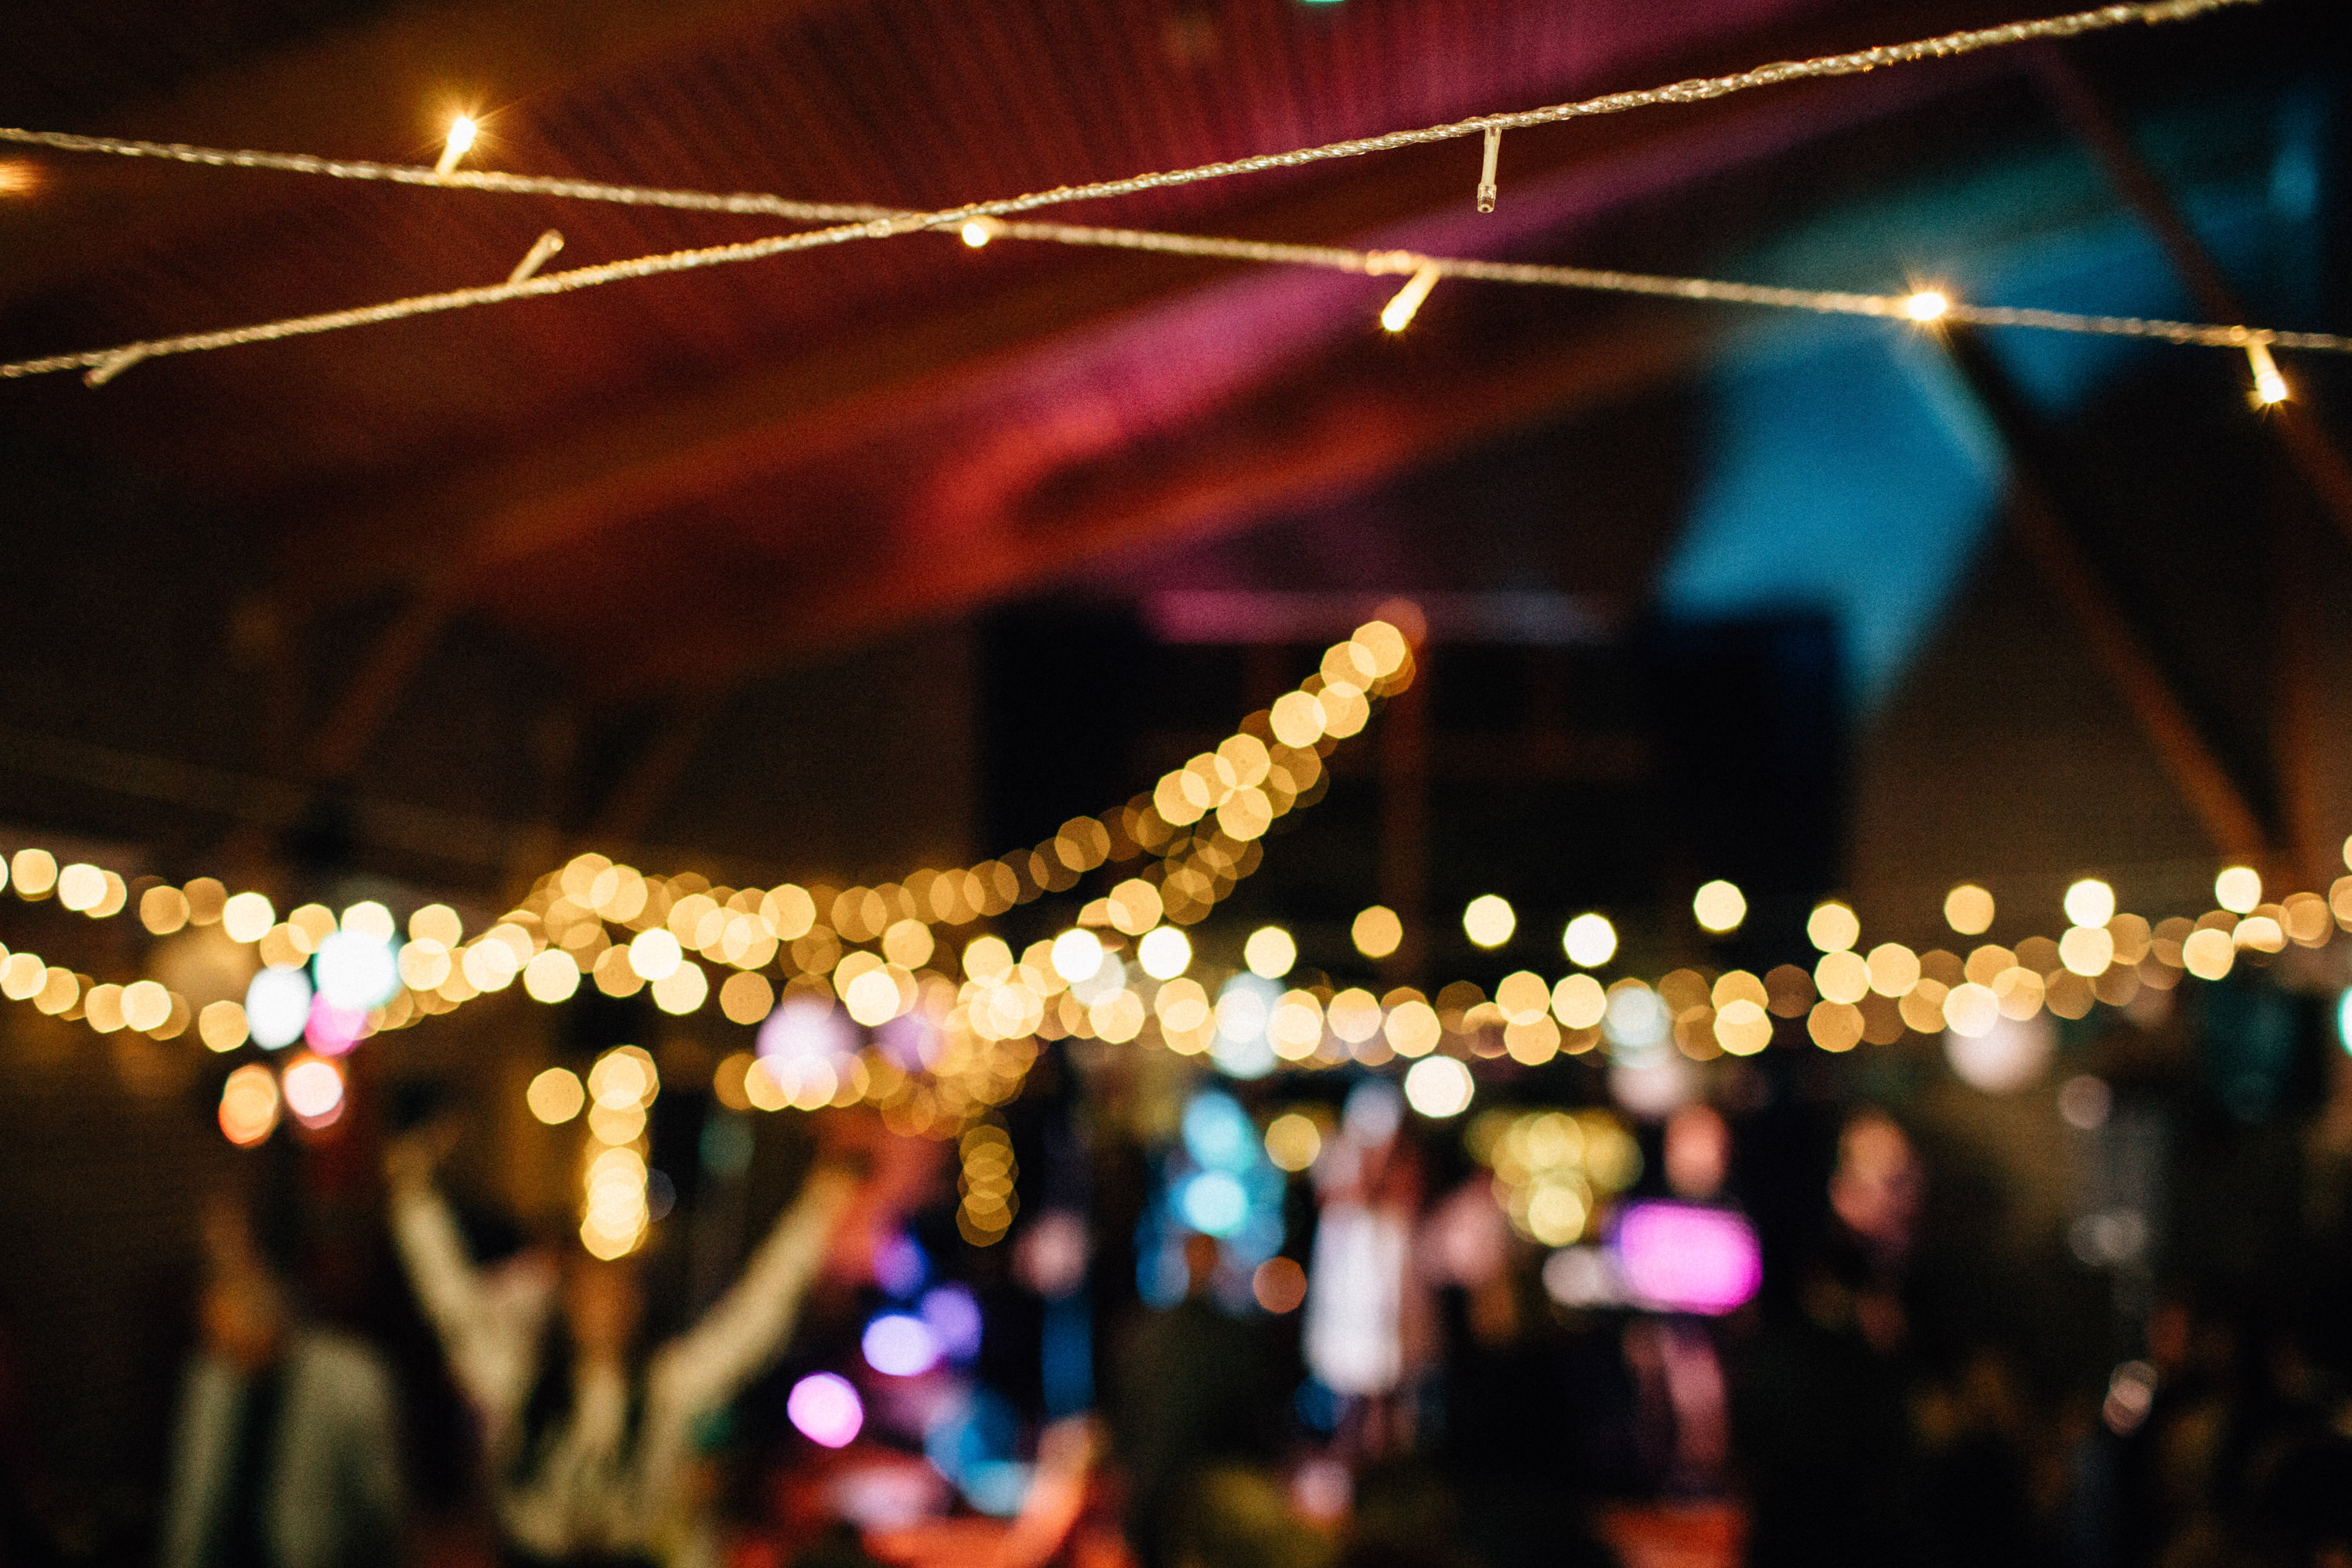 quirky fun autumn wedding in london wedding photographer documentary style first dance fairy lights decoration